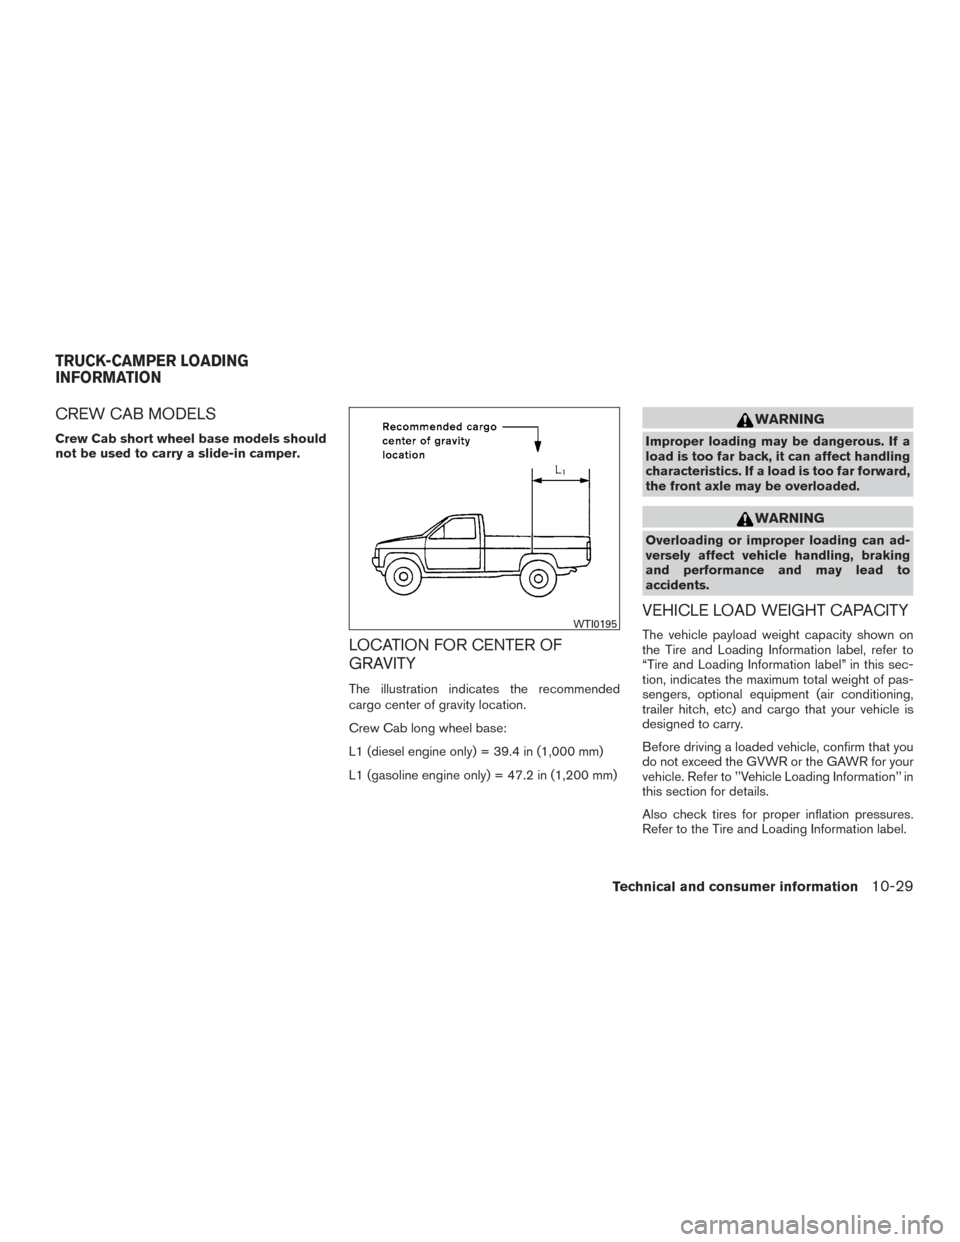 NISSAN TITAN 2016 2.G Service Manual CREW CAB MODELS
Crew Cab short wheel base models should
not be used to carry a slide-in camper.
LOCATION FOR CENTER OF
GRAVITY
The illustration indicates the recommended
cargo center of gravity locati